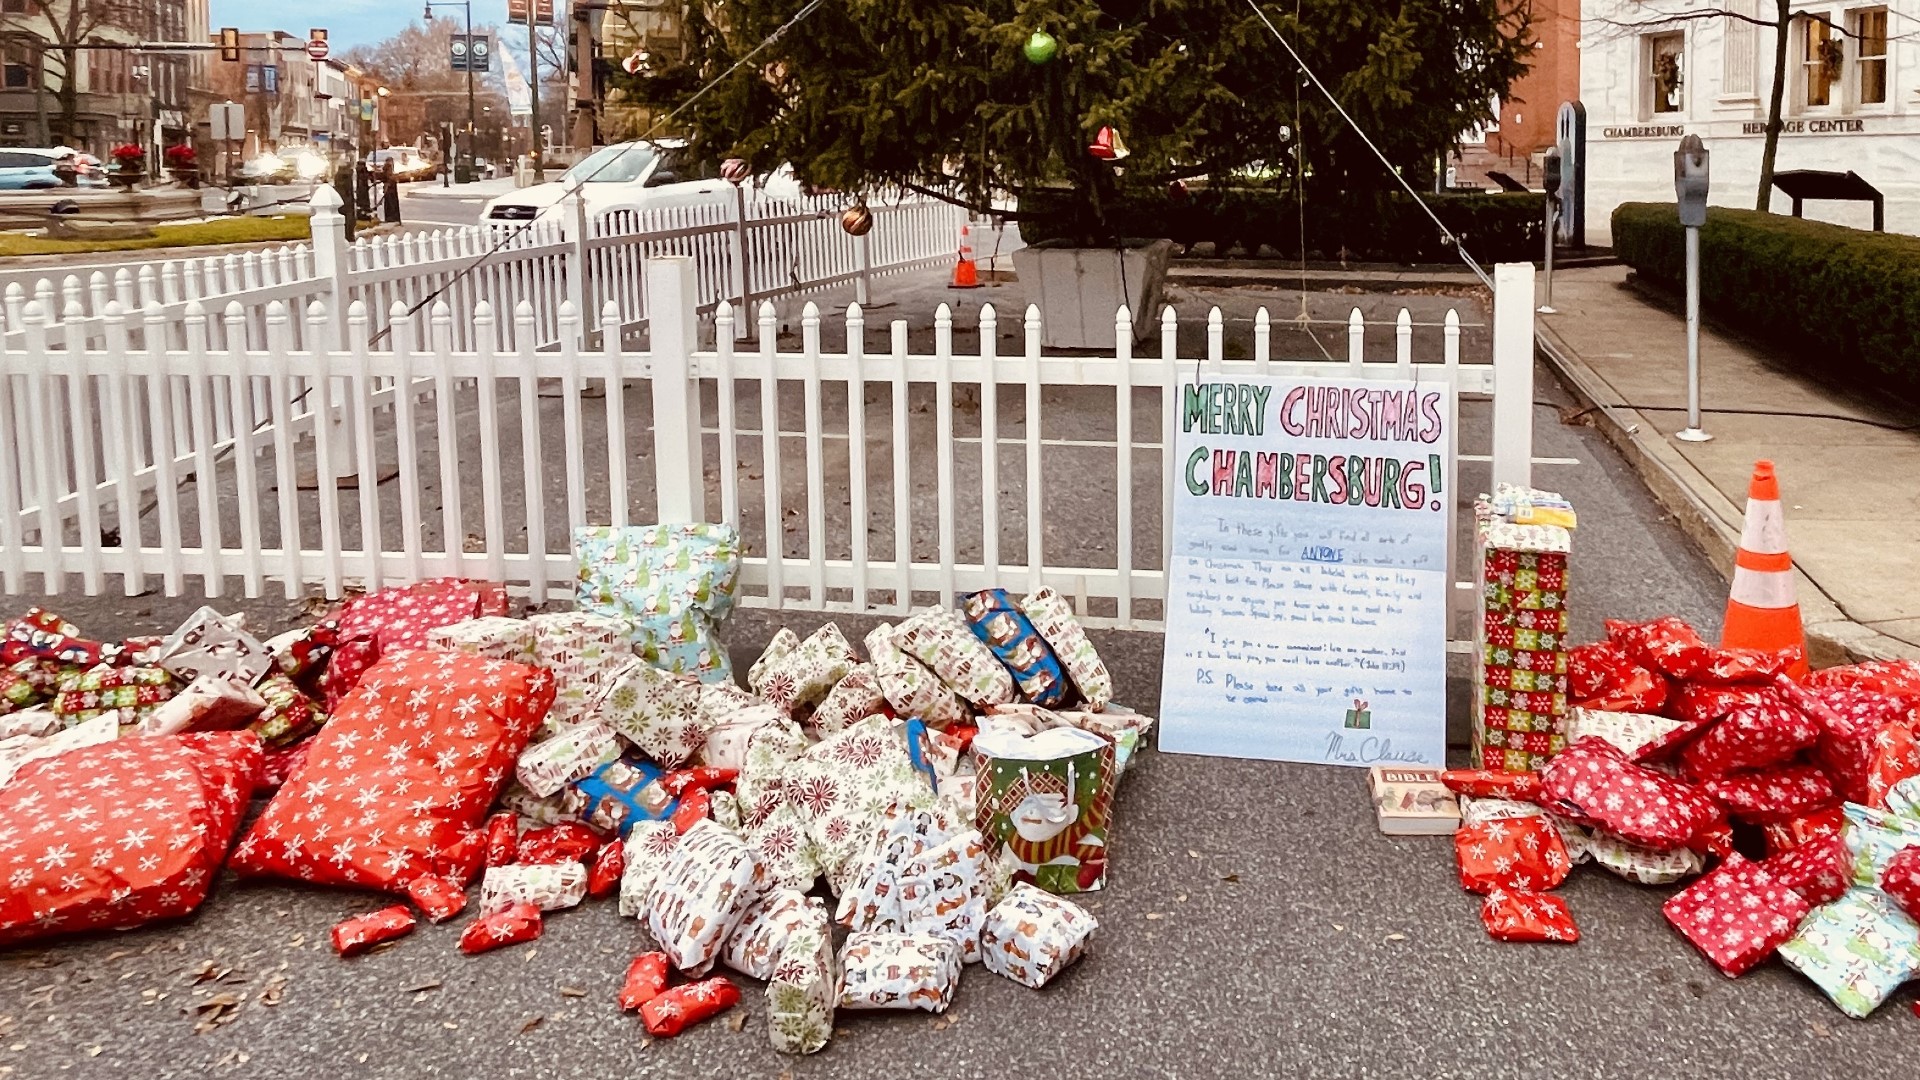 The gifts were given by an anonymous 'Mrs. Claus' to help families in need this holiday season.